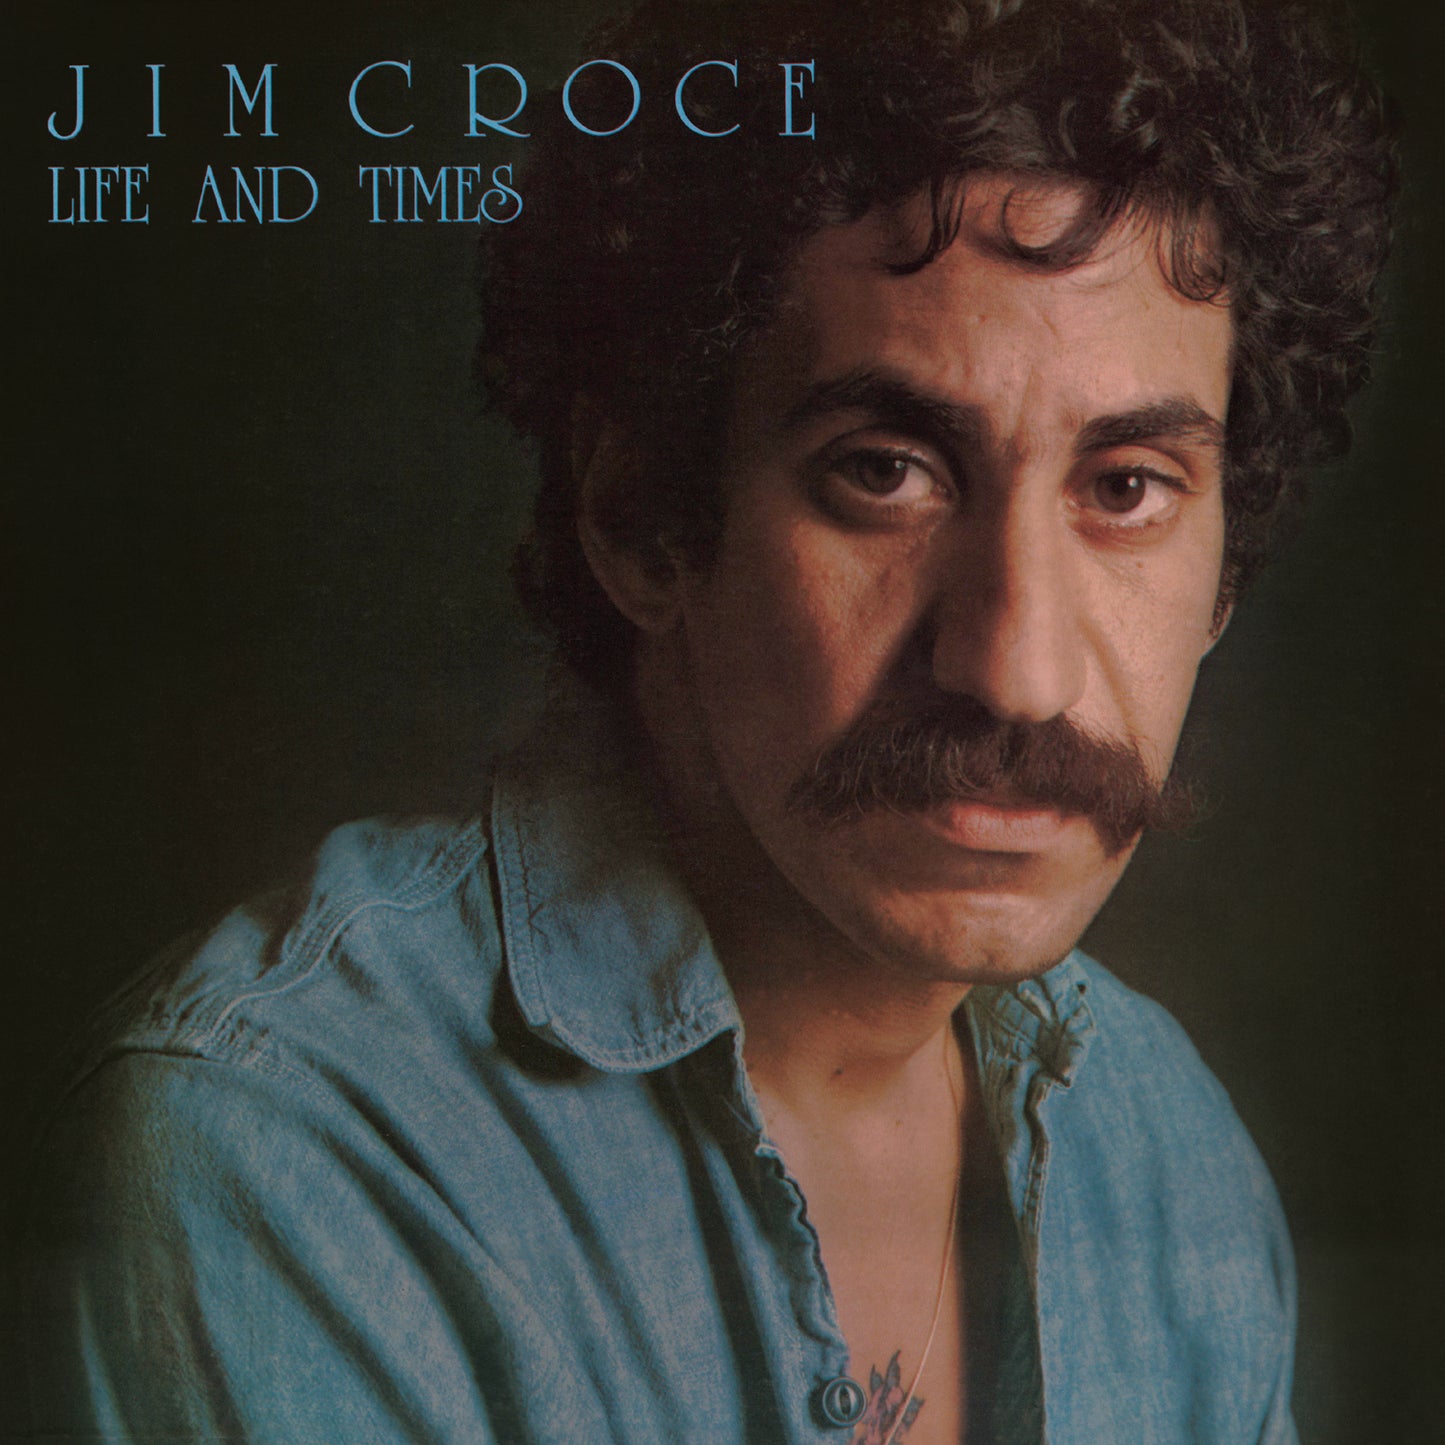 JIM CROCE - LIFE AND TIMES - 50TH ANNIVERSARY EDITION - LIGHT BLUE COLOR - VINYL LP